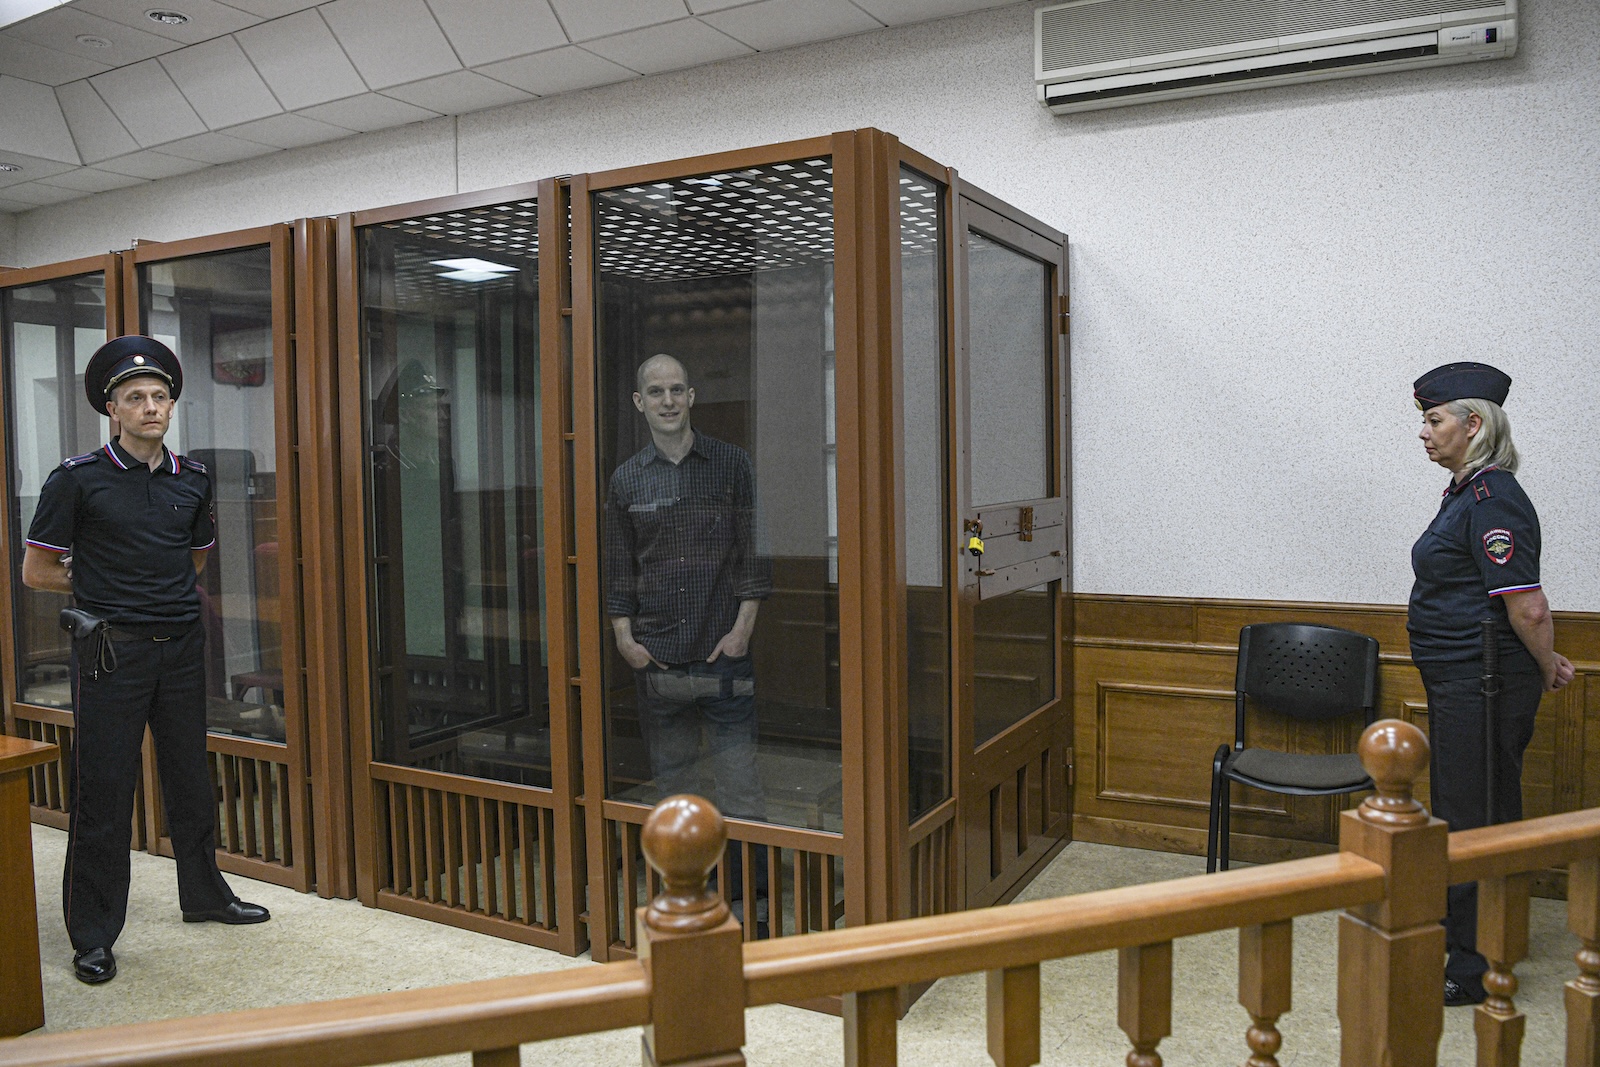 epa11438407 WSJ correspondent Evan Gershkovich stands in a glass cage prior to a hearing in Yekaterinburg's Sverdlovsk Regional Court, Yekaterinburg, Russia, 26 June 2024. Evan Gershkovich, a US journalist of The Wall Street Journal covering Russia, was detained in Yekaterinburg on 29 March 2023. The Russia's Federal Security Service (FSB) claimed that on the instructions of the American authorities, the journalist collected information constituting a state secret about one of the enterprises of the Russian military-industrial complex. He is charged with espionage under Art. 276 of the Criminal Code of the Russian Federation, which could carry a sentence of up to 20 years.  EPA/STRINGER